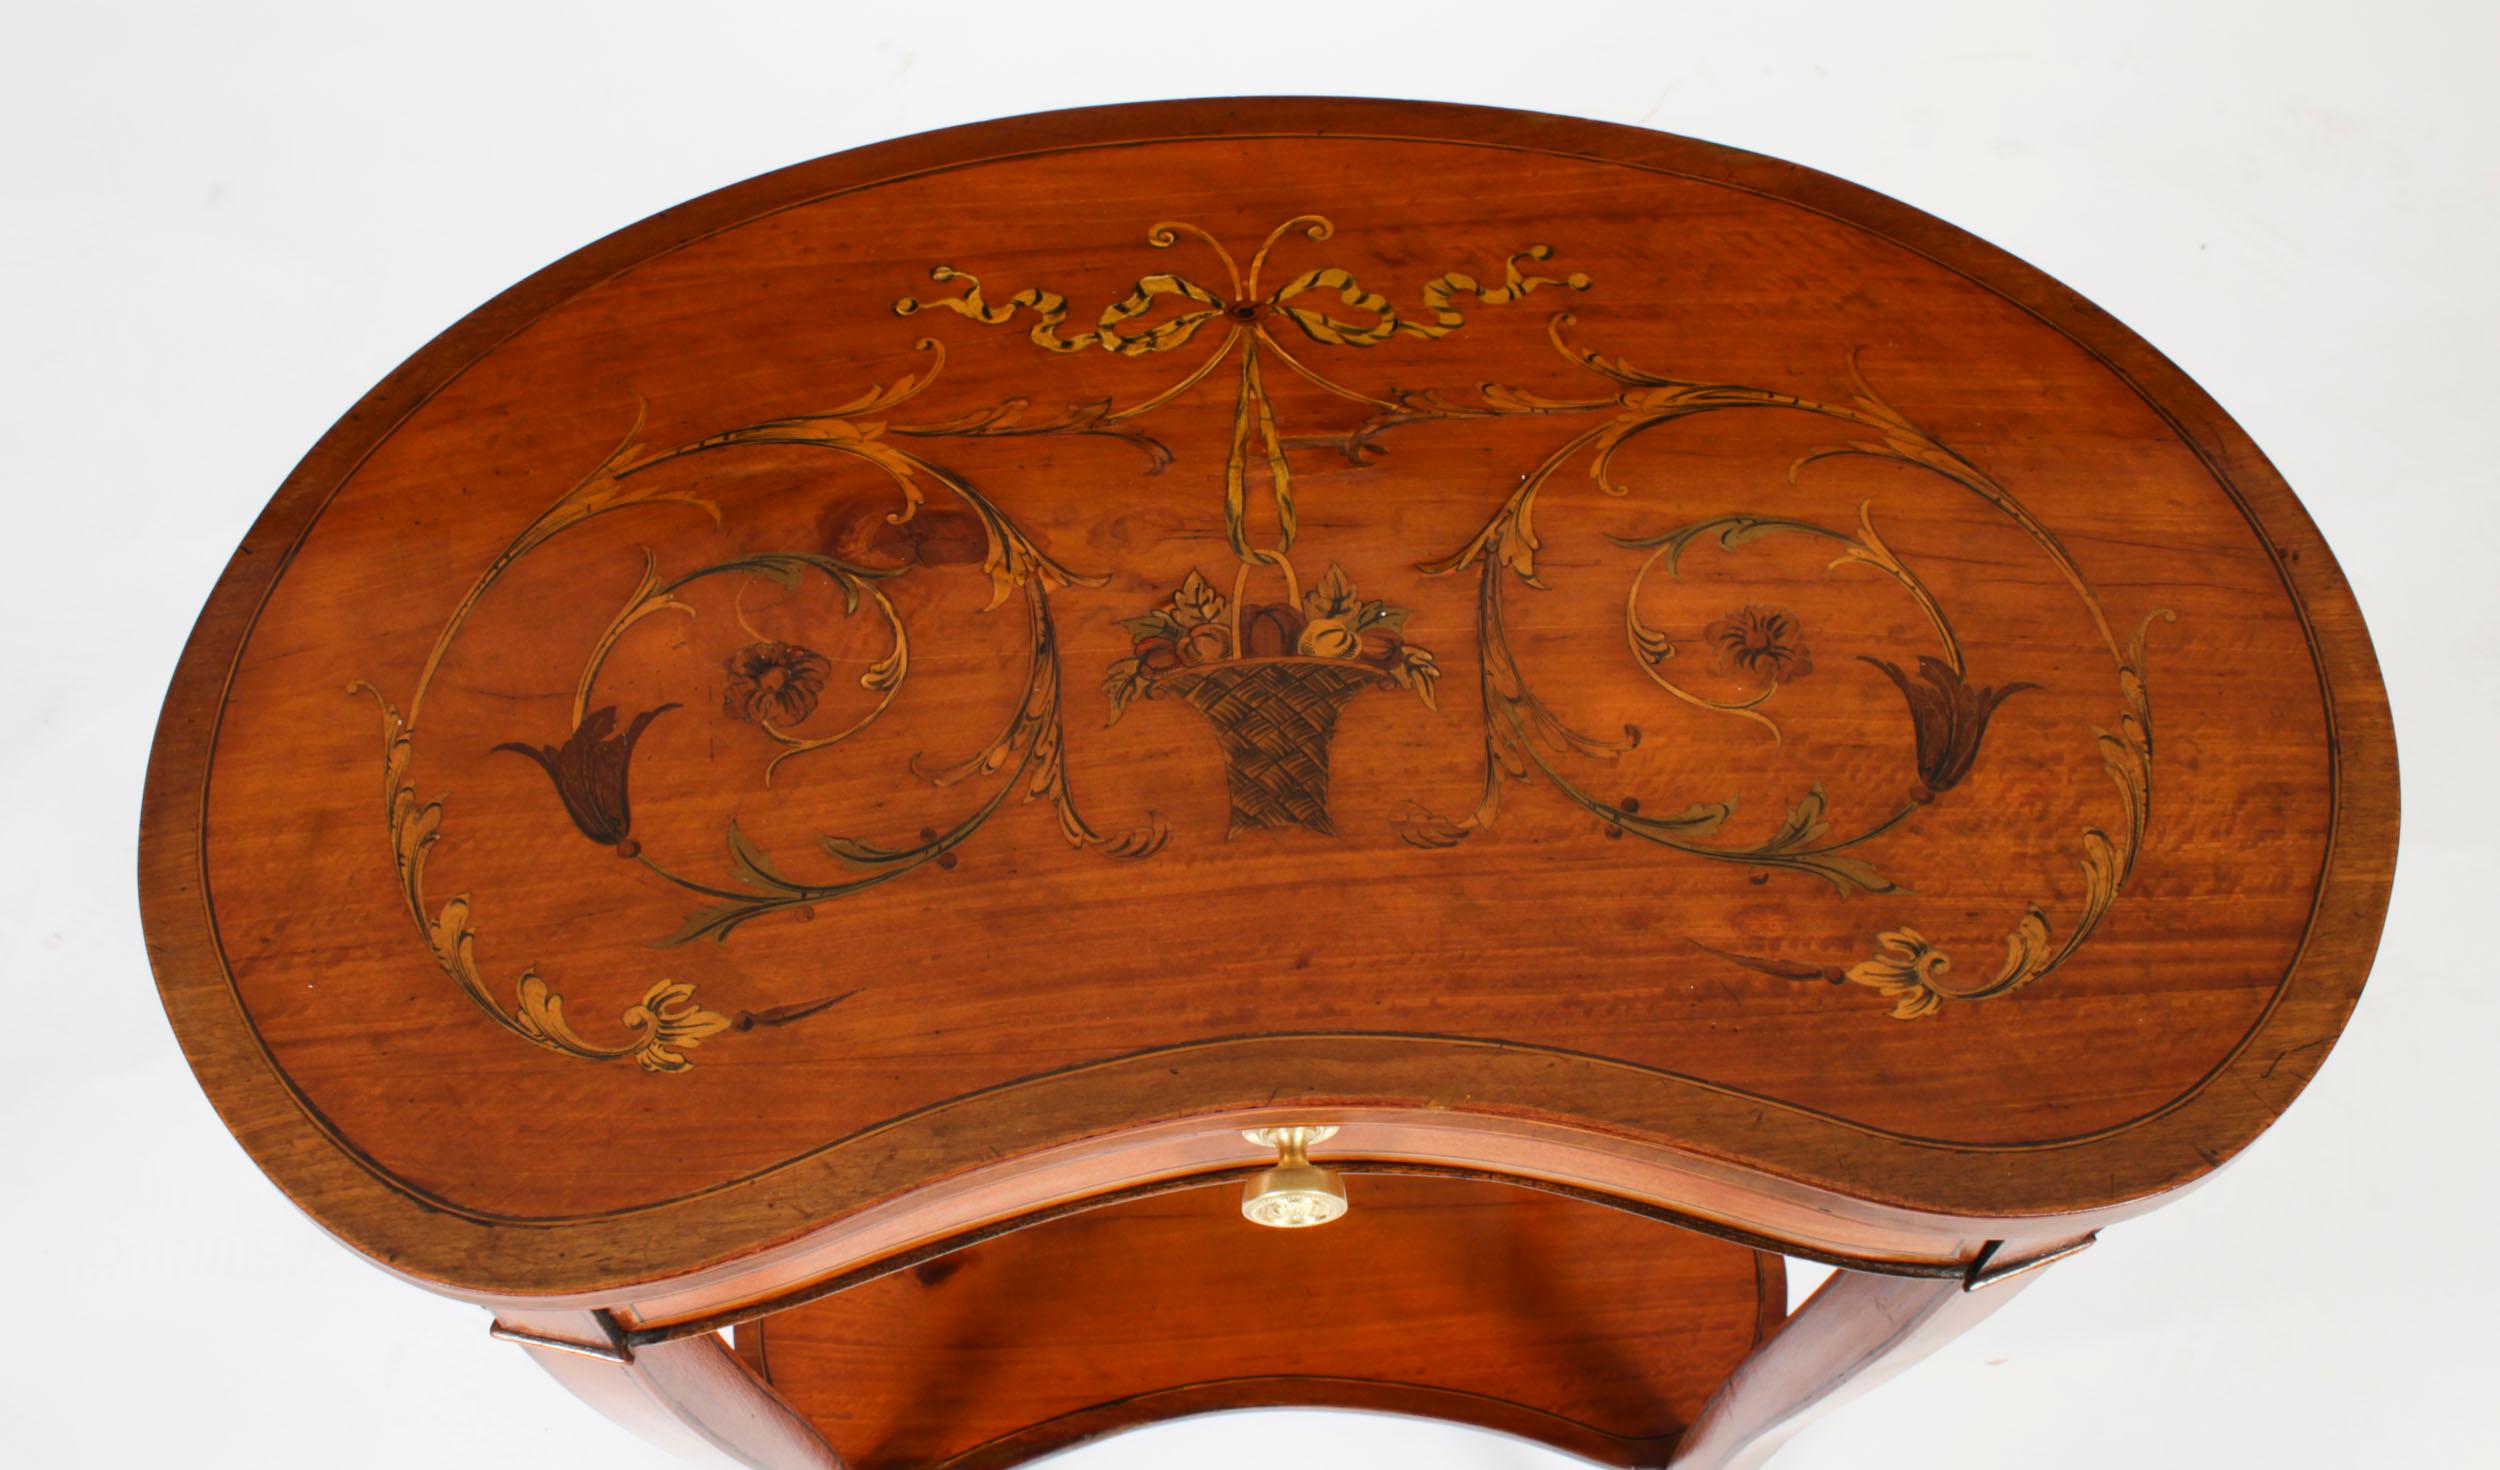 This is a beautiful antique English satinwood kidney shaped satinwood  marquetry inlaid occasional tables, Circa 1880 in date.

The table has a crossbanded top beautifully inlaid with ribbon tied flowers, the frieze with a useful drawer.

It is